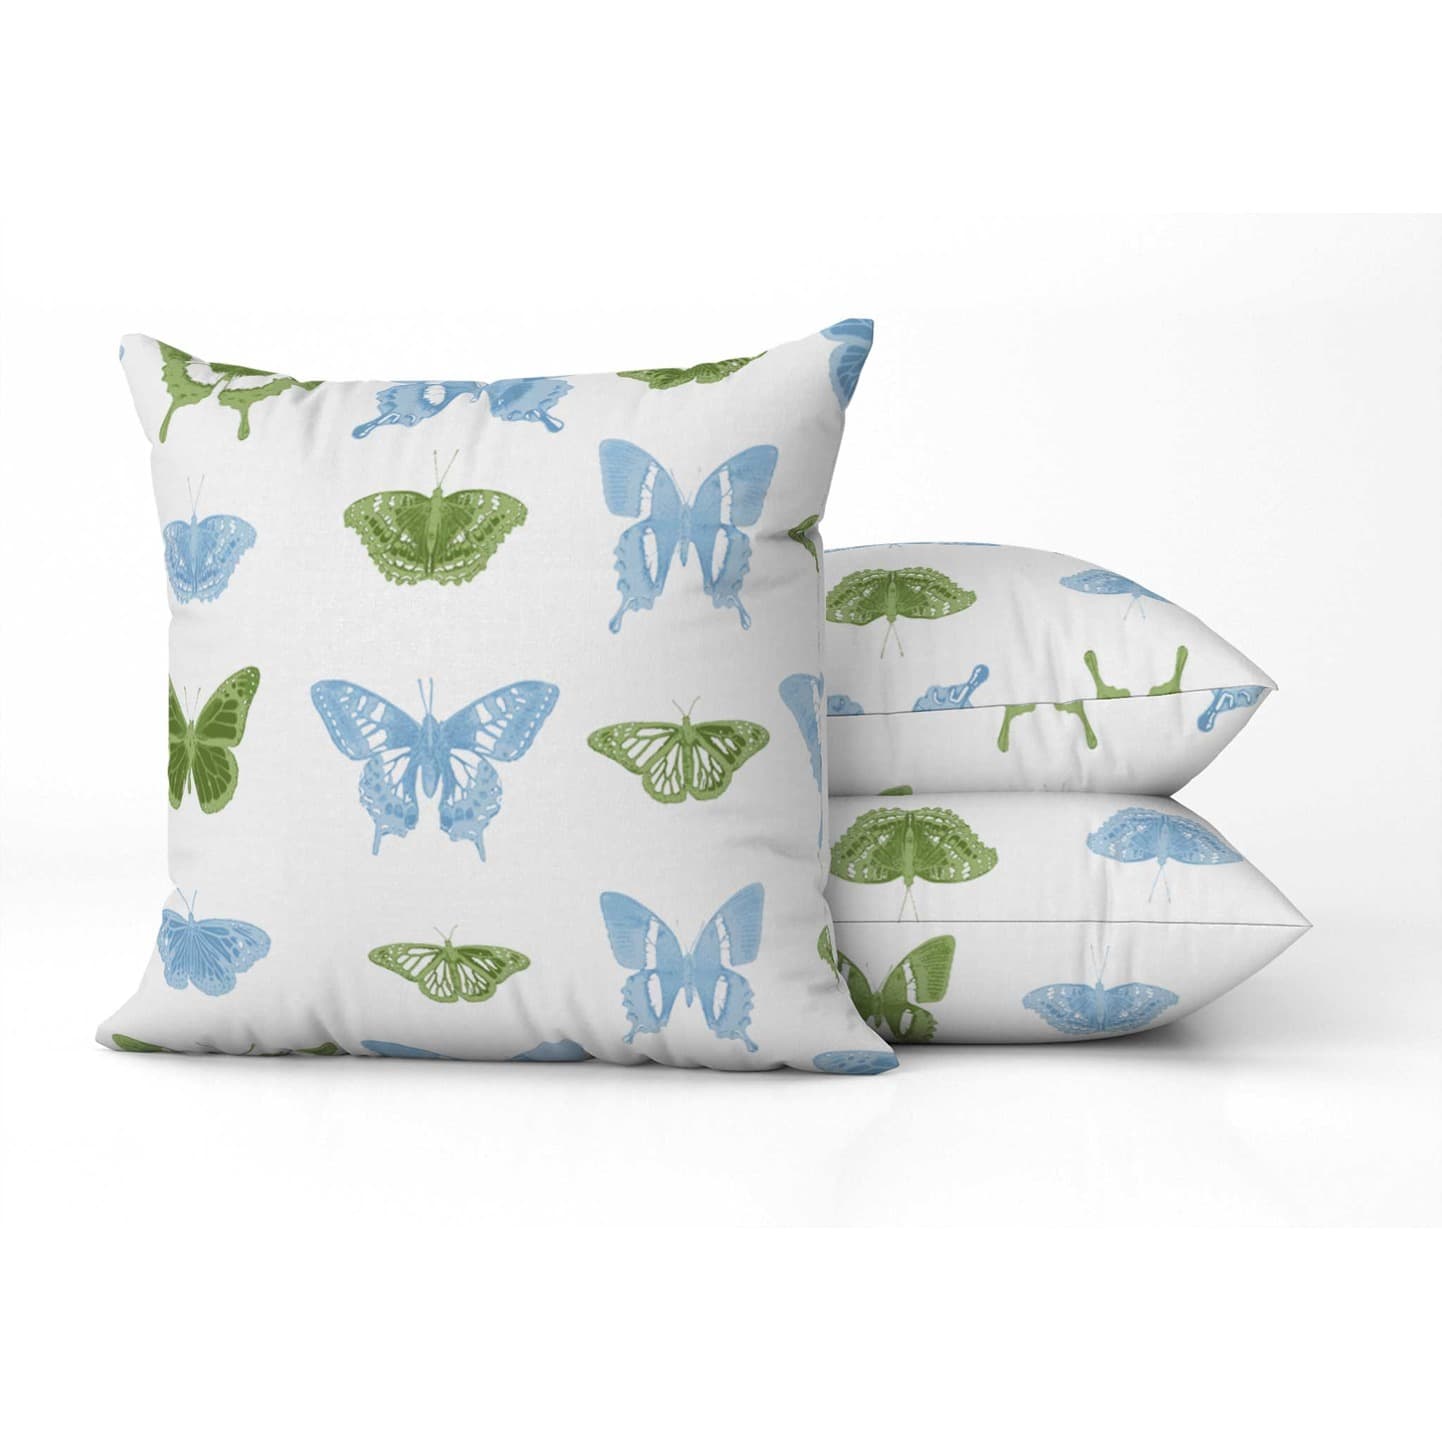 Butterfly March Square Pillow in Sky Grass